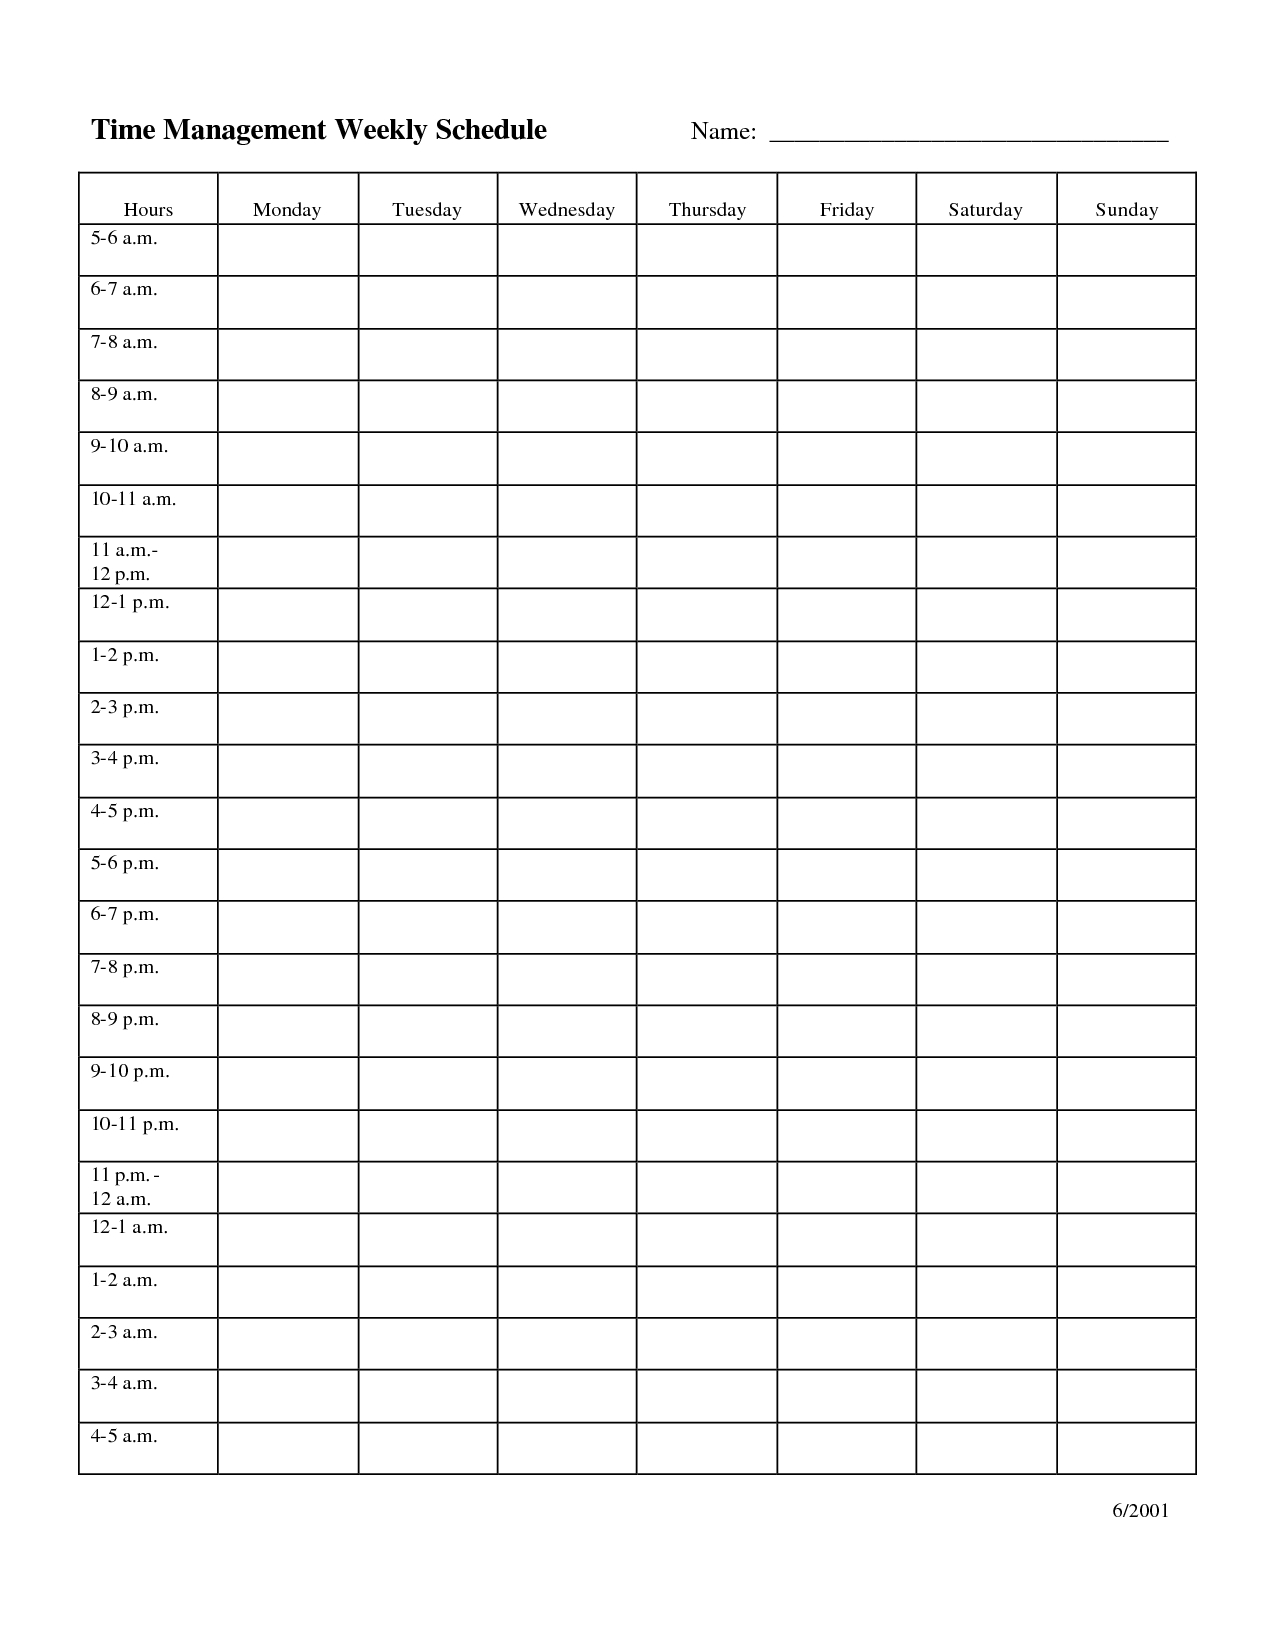 Time Management Weekly Schedule Template … | Bobbies …  Week Schedule Template With Times